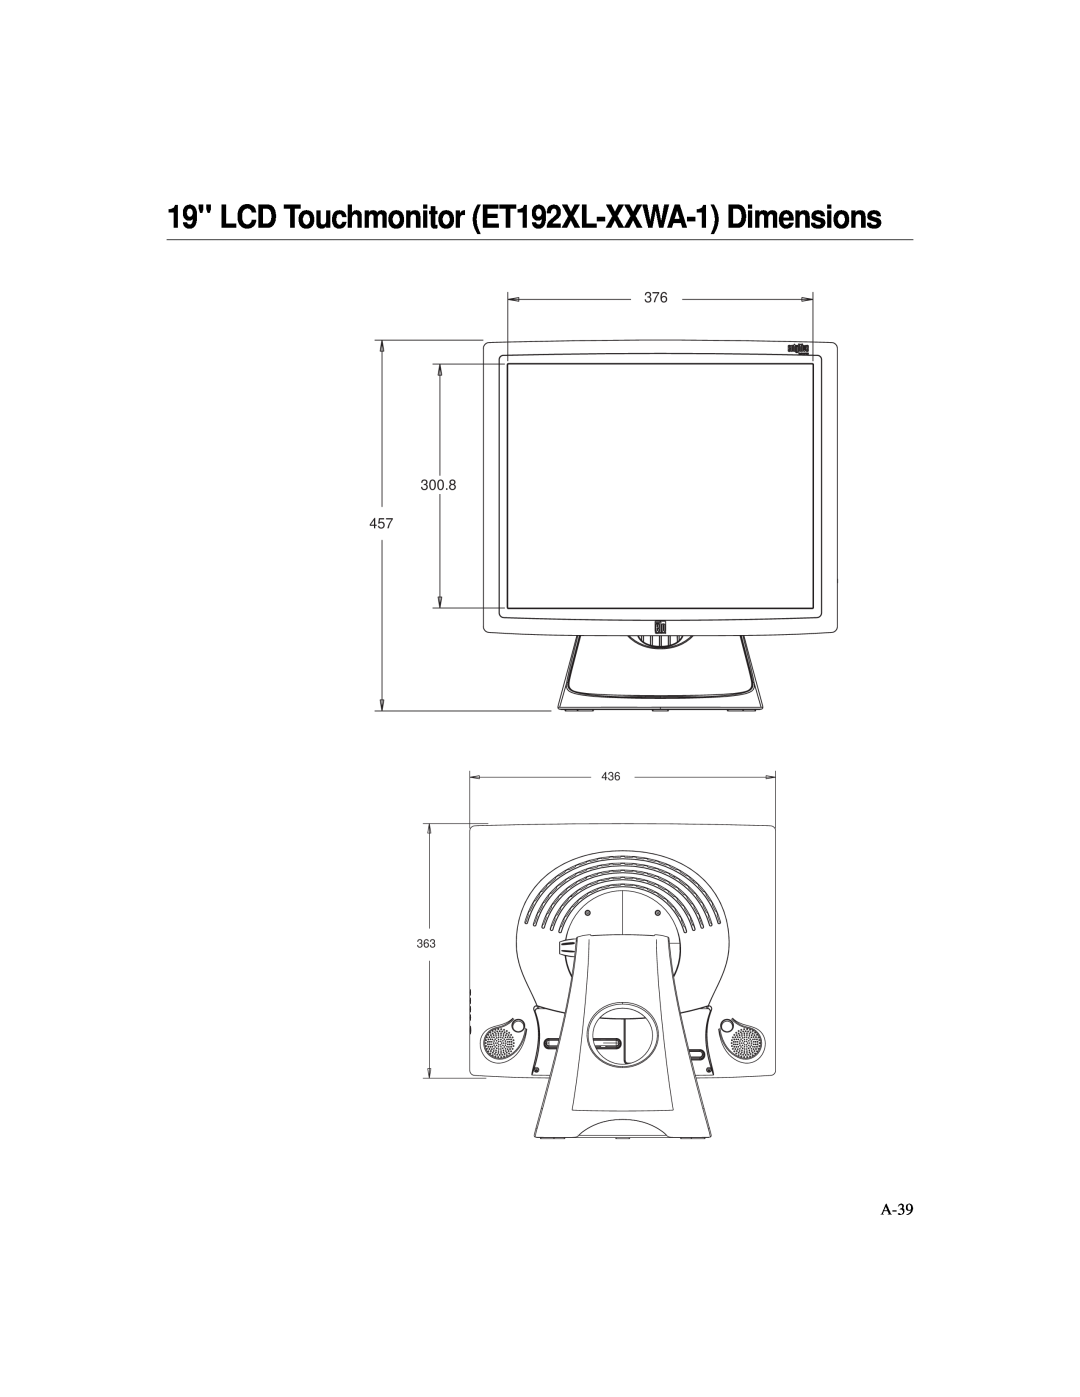 Elo TouchSystems 1925L manual LCD Touchmonitor ET192XL-XXWA-1 Dimensions, A-39, 376 300.8 457, 436 363 